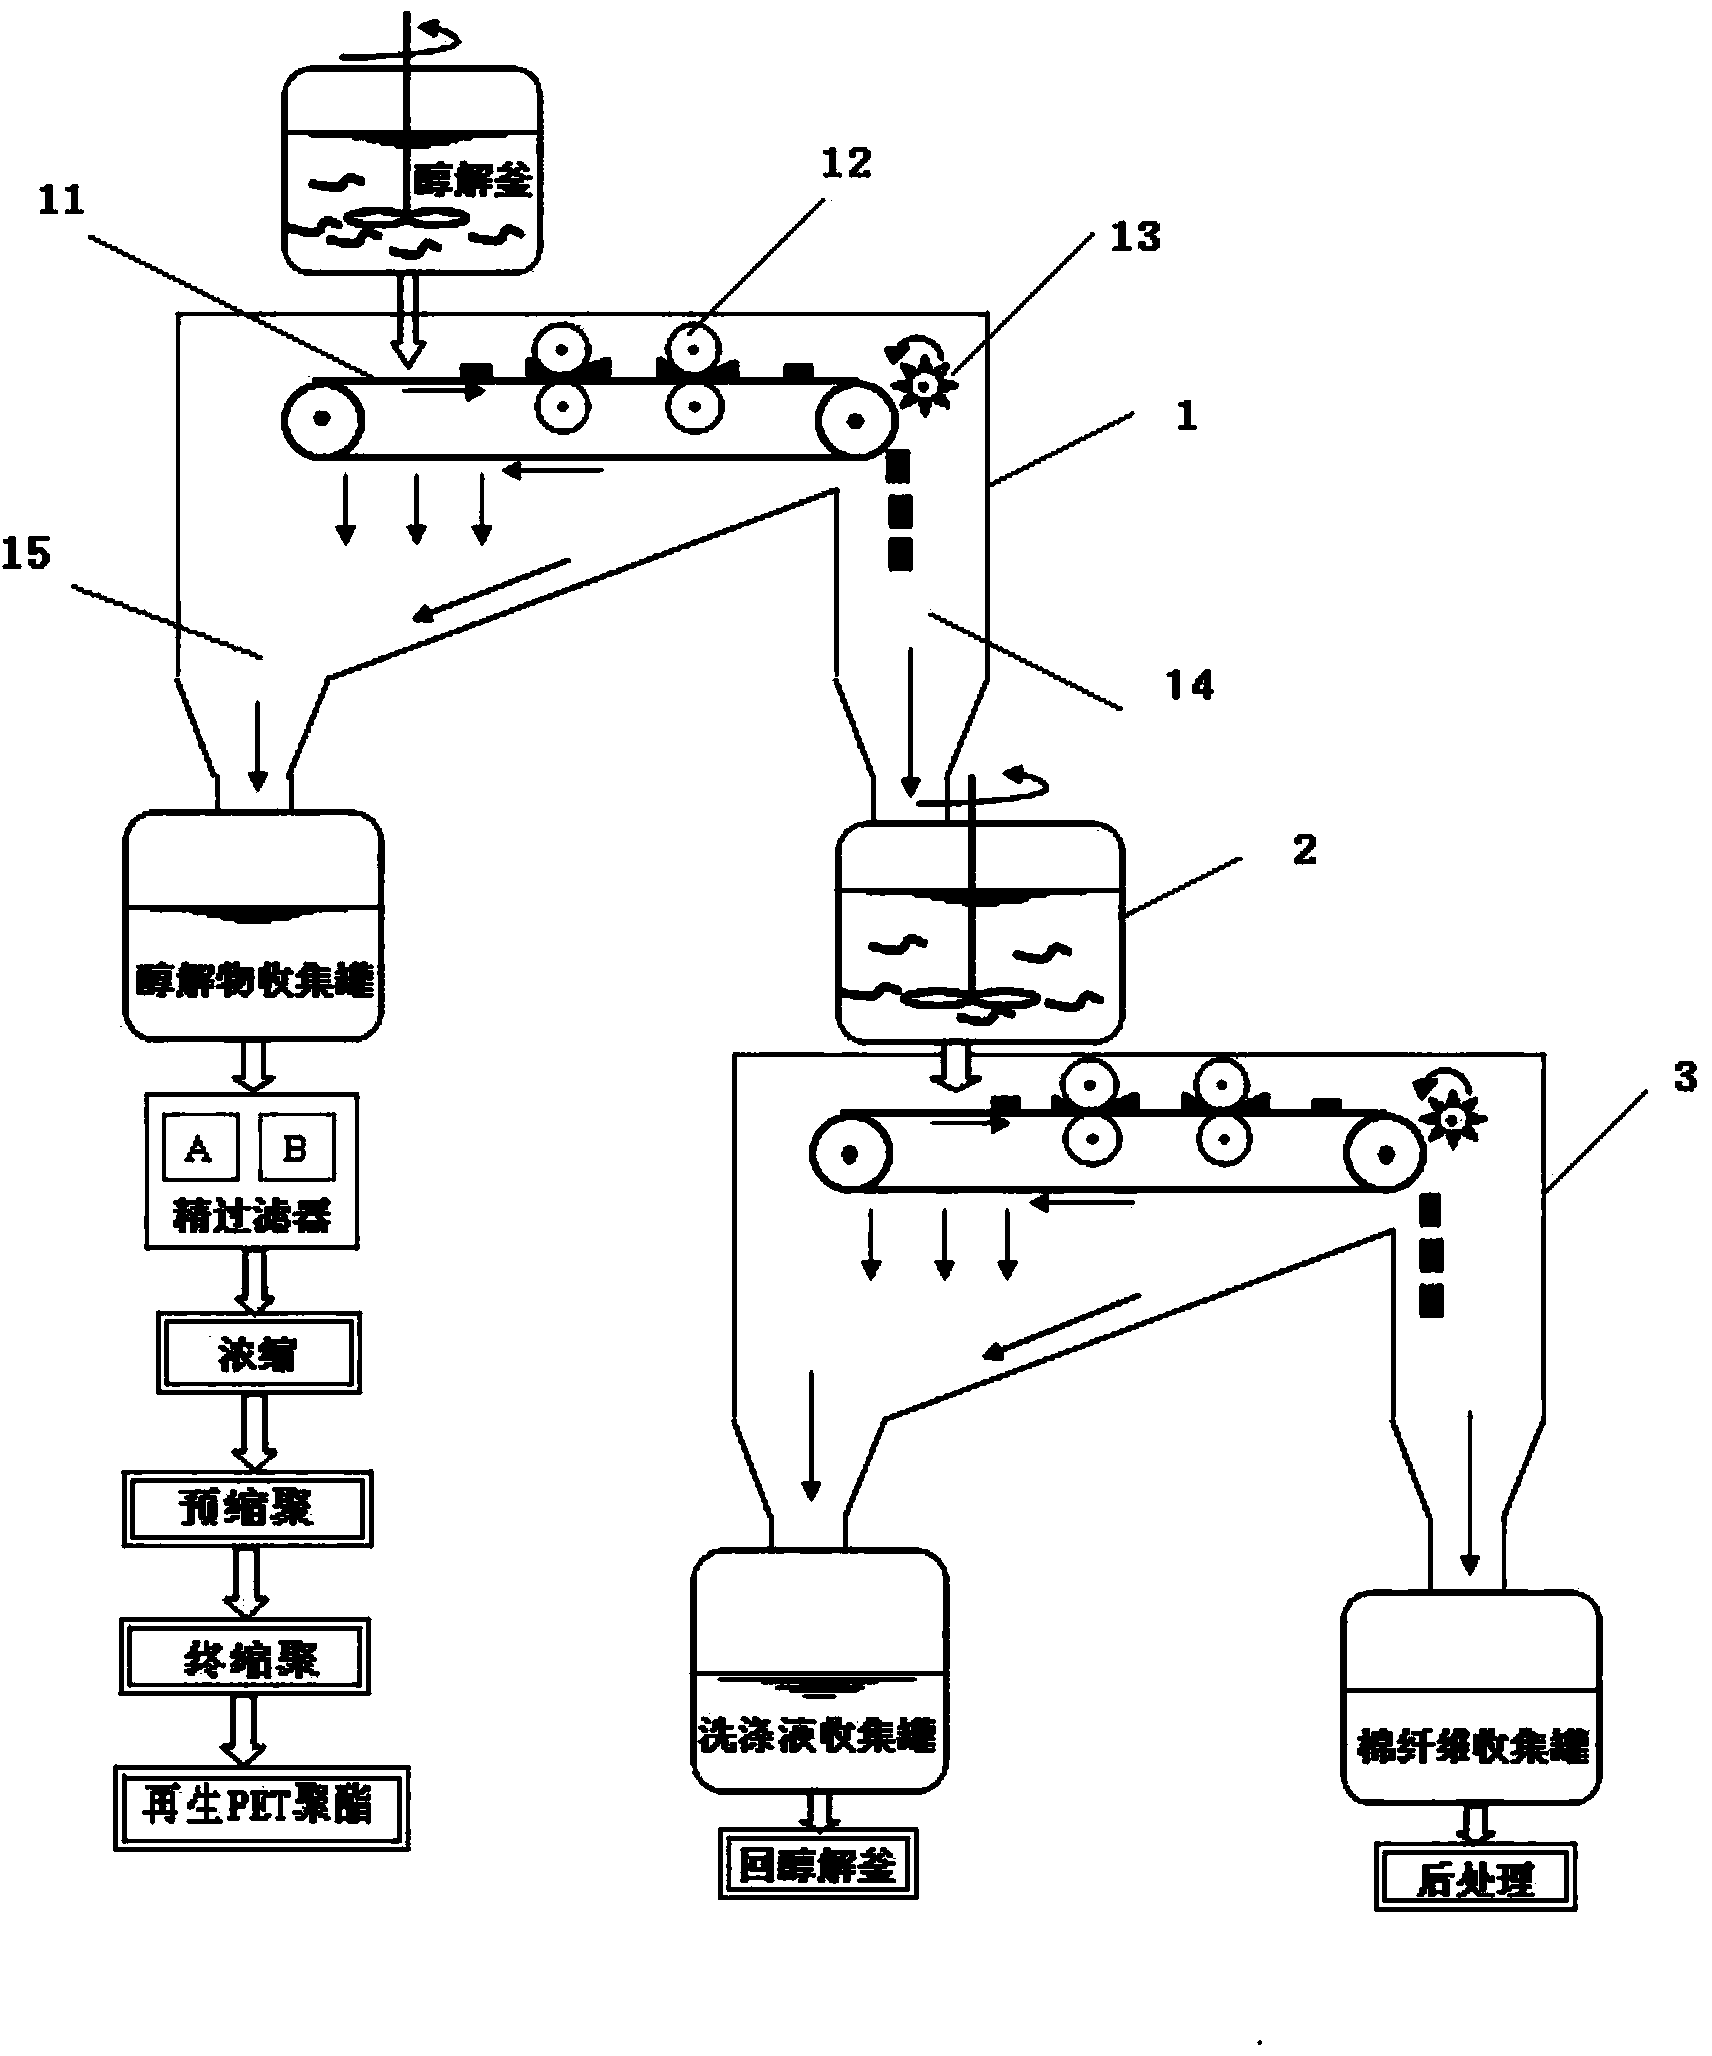 Device and process for continuously separating and recycling waste polyester cotton textiles